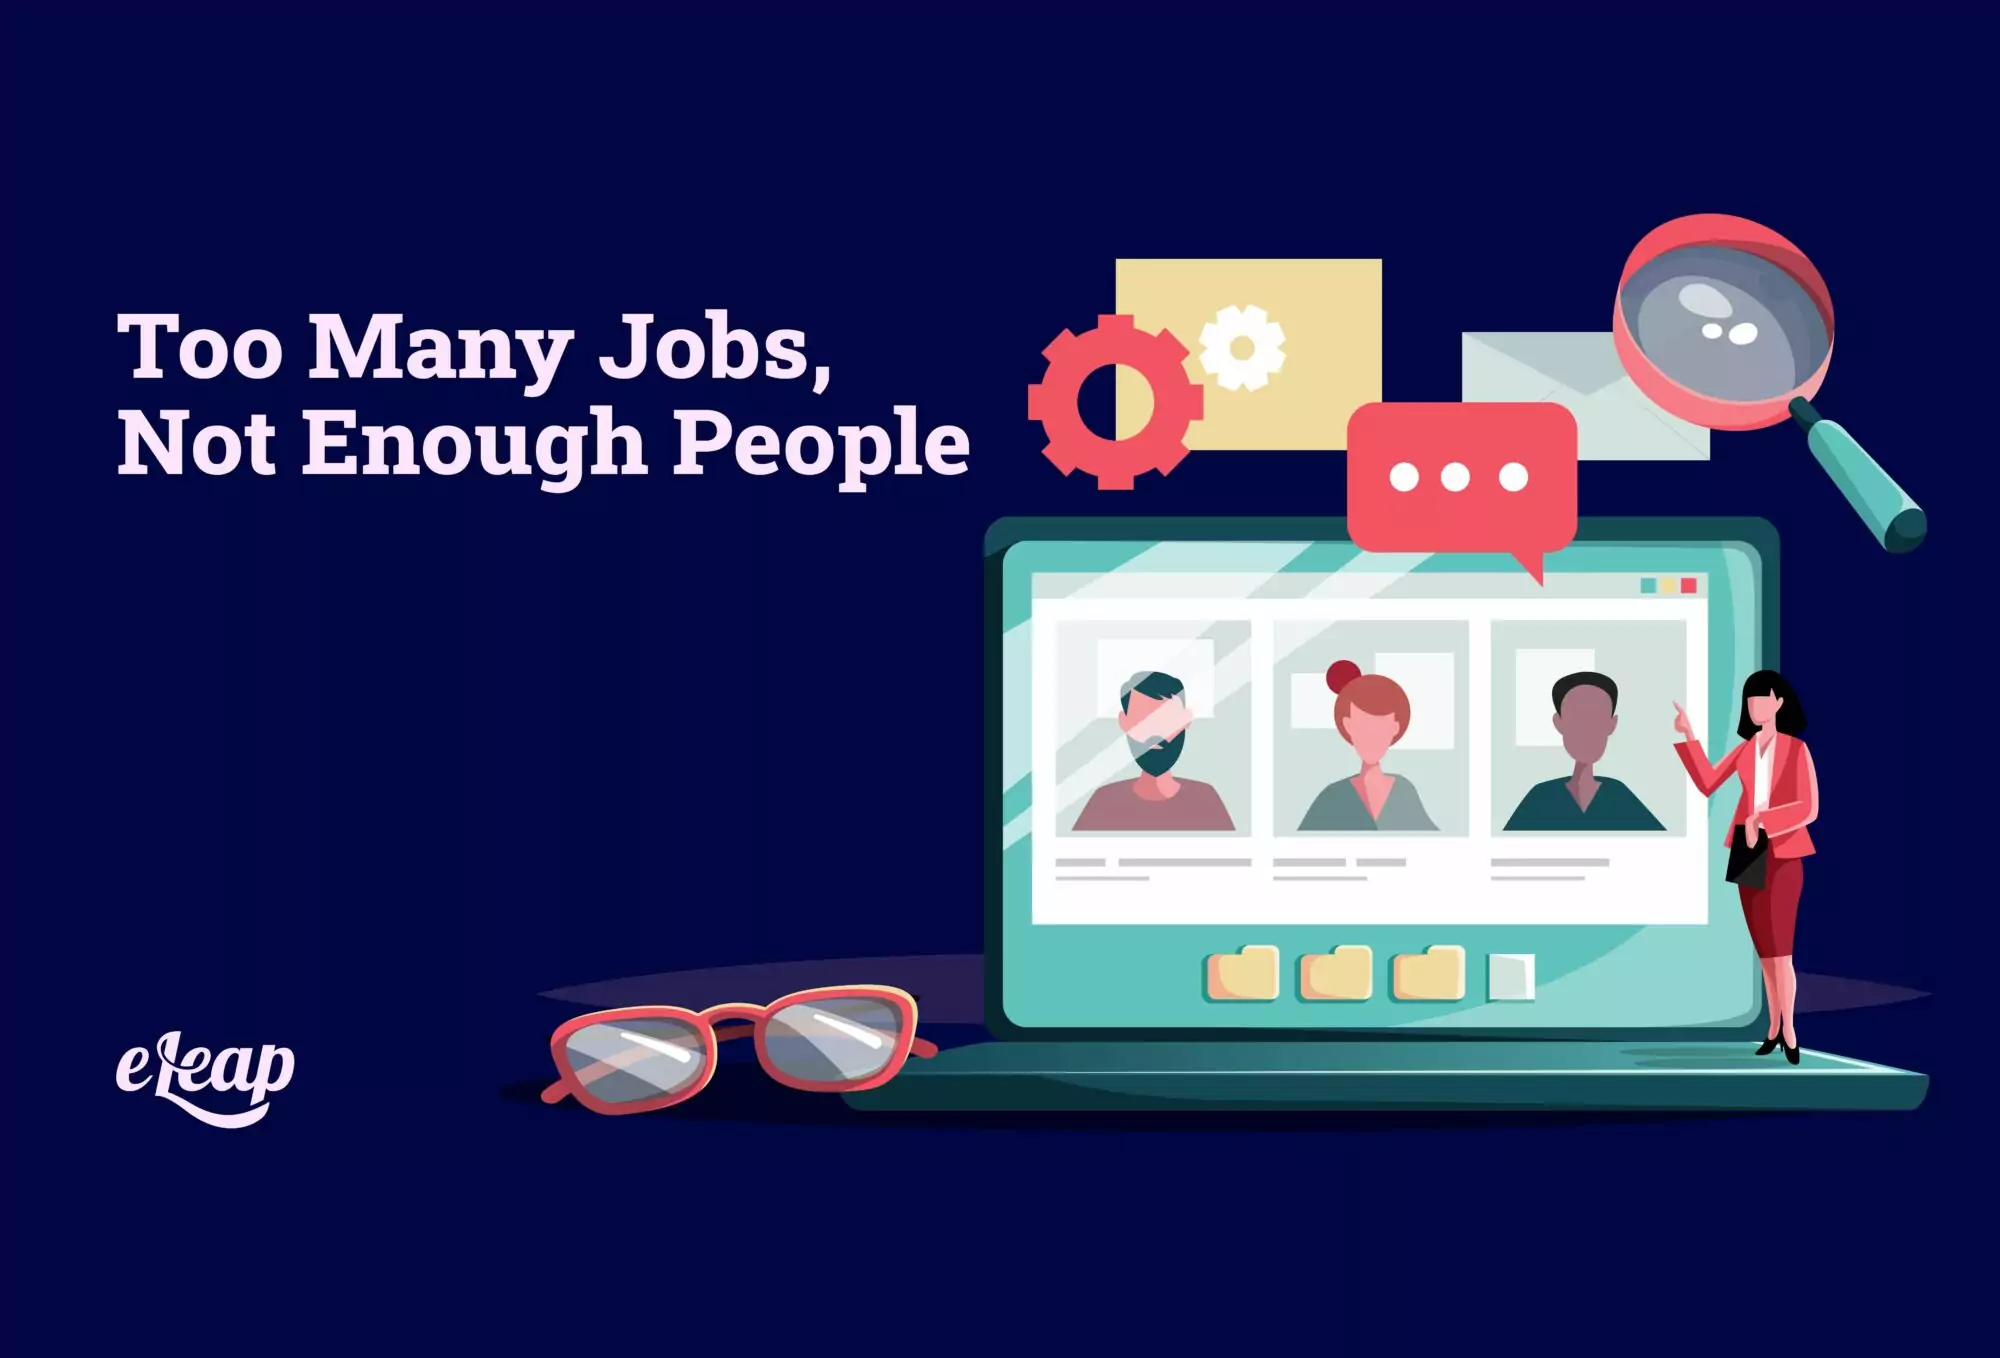 Too Many Jobs, Not Enough People